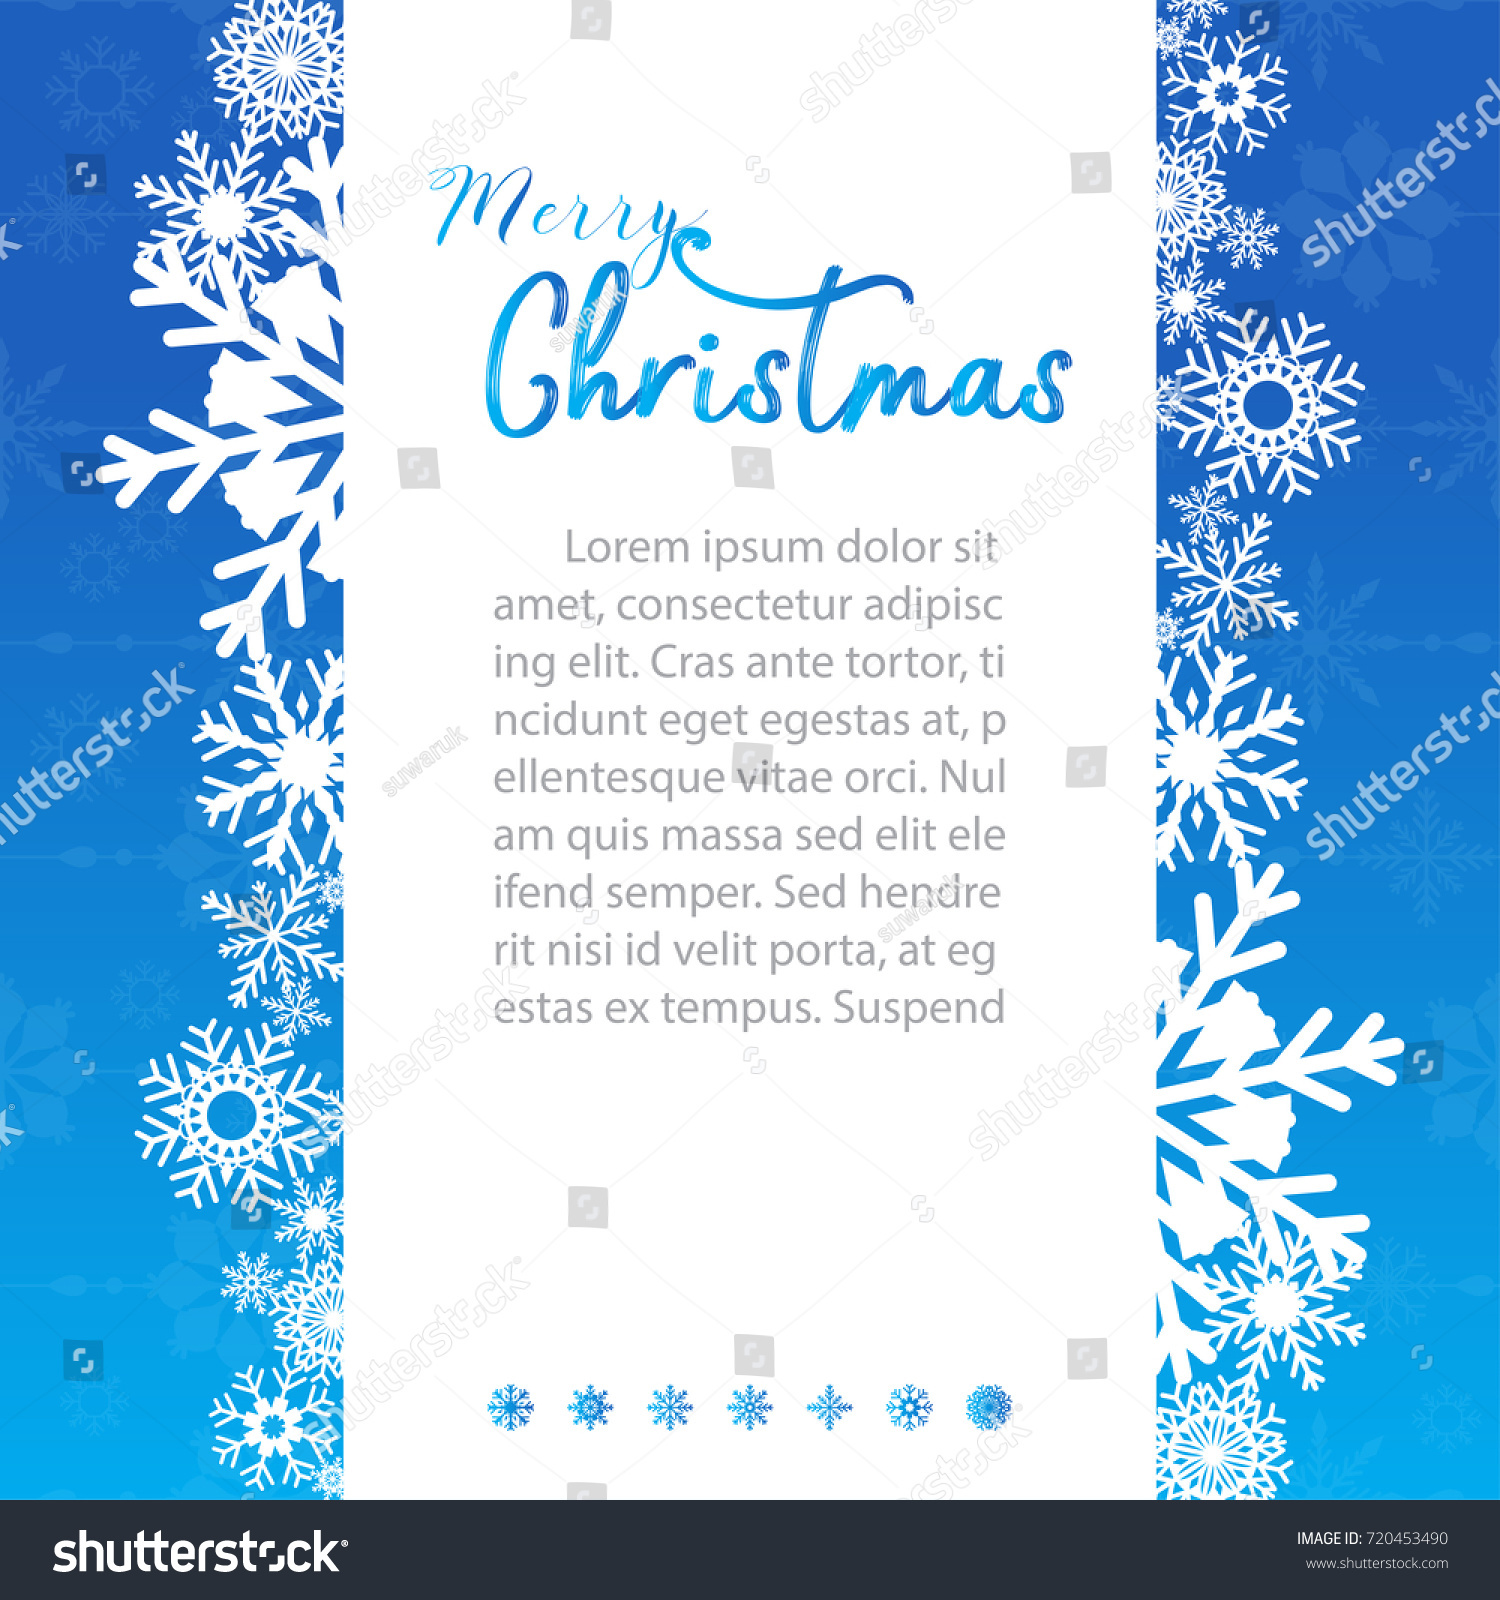 template christmas card in square size for wallpaper banner vector illustration